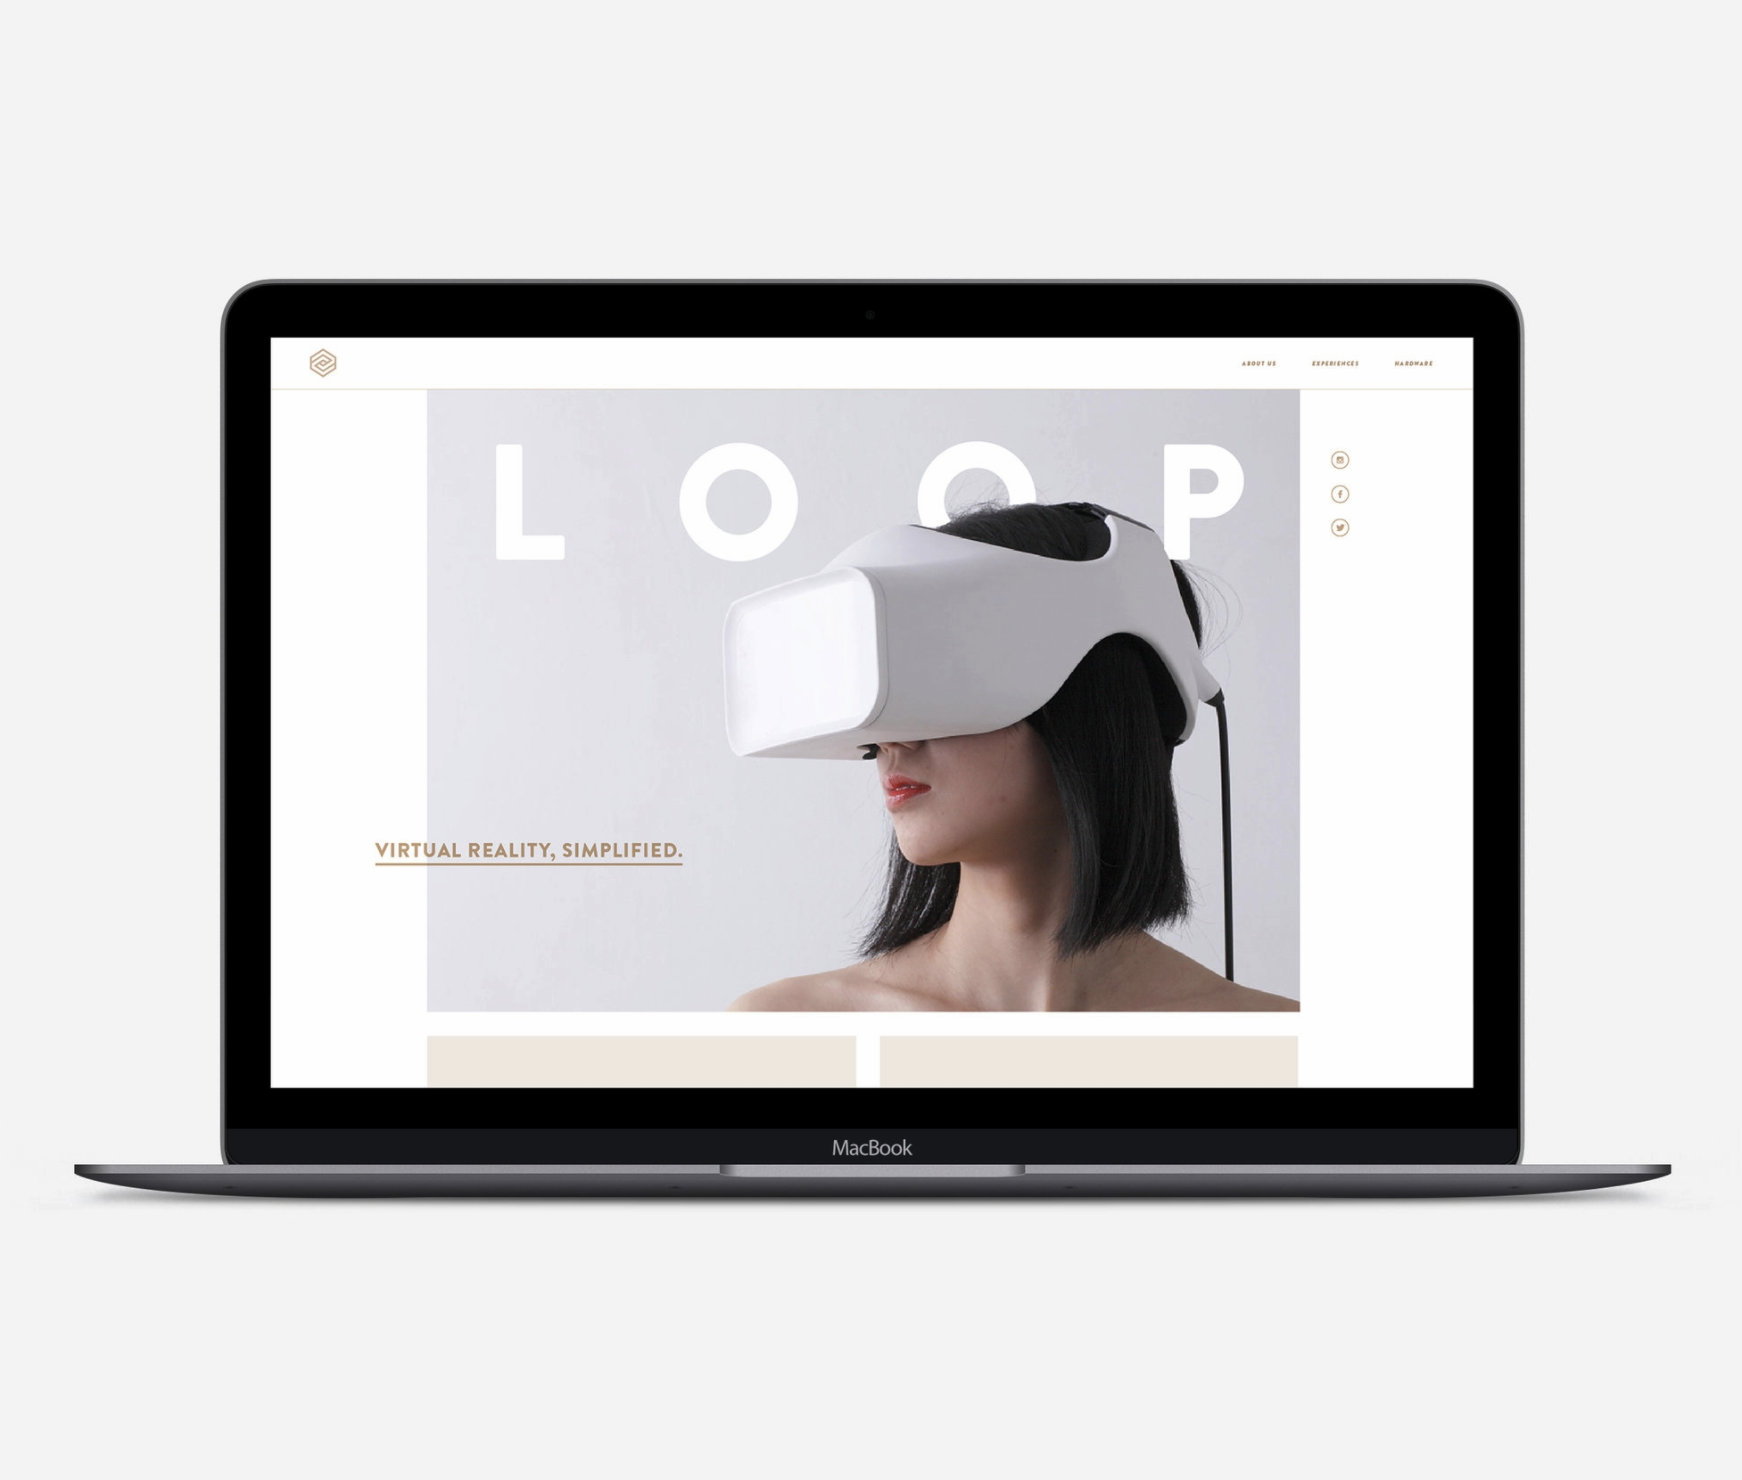 Loop website design, for a virtual reality company